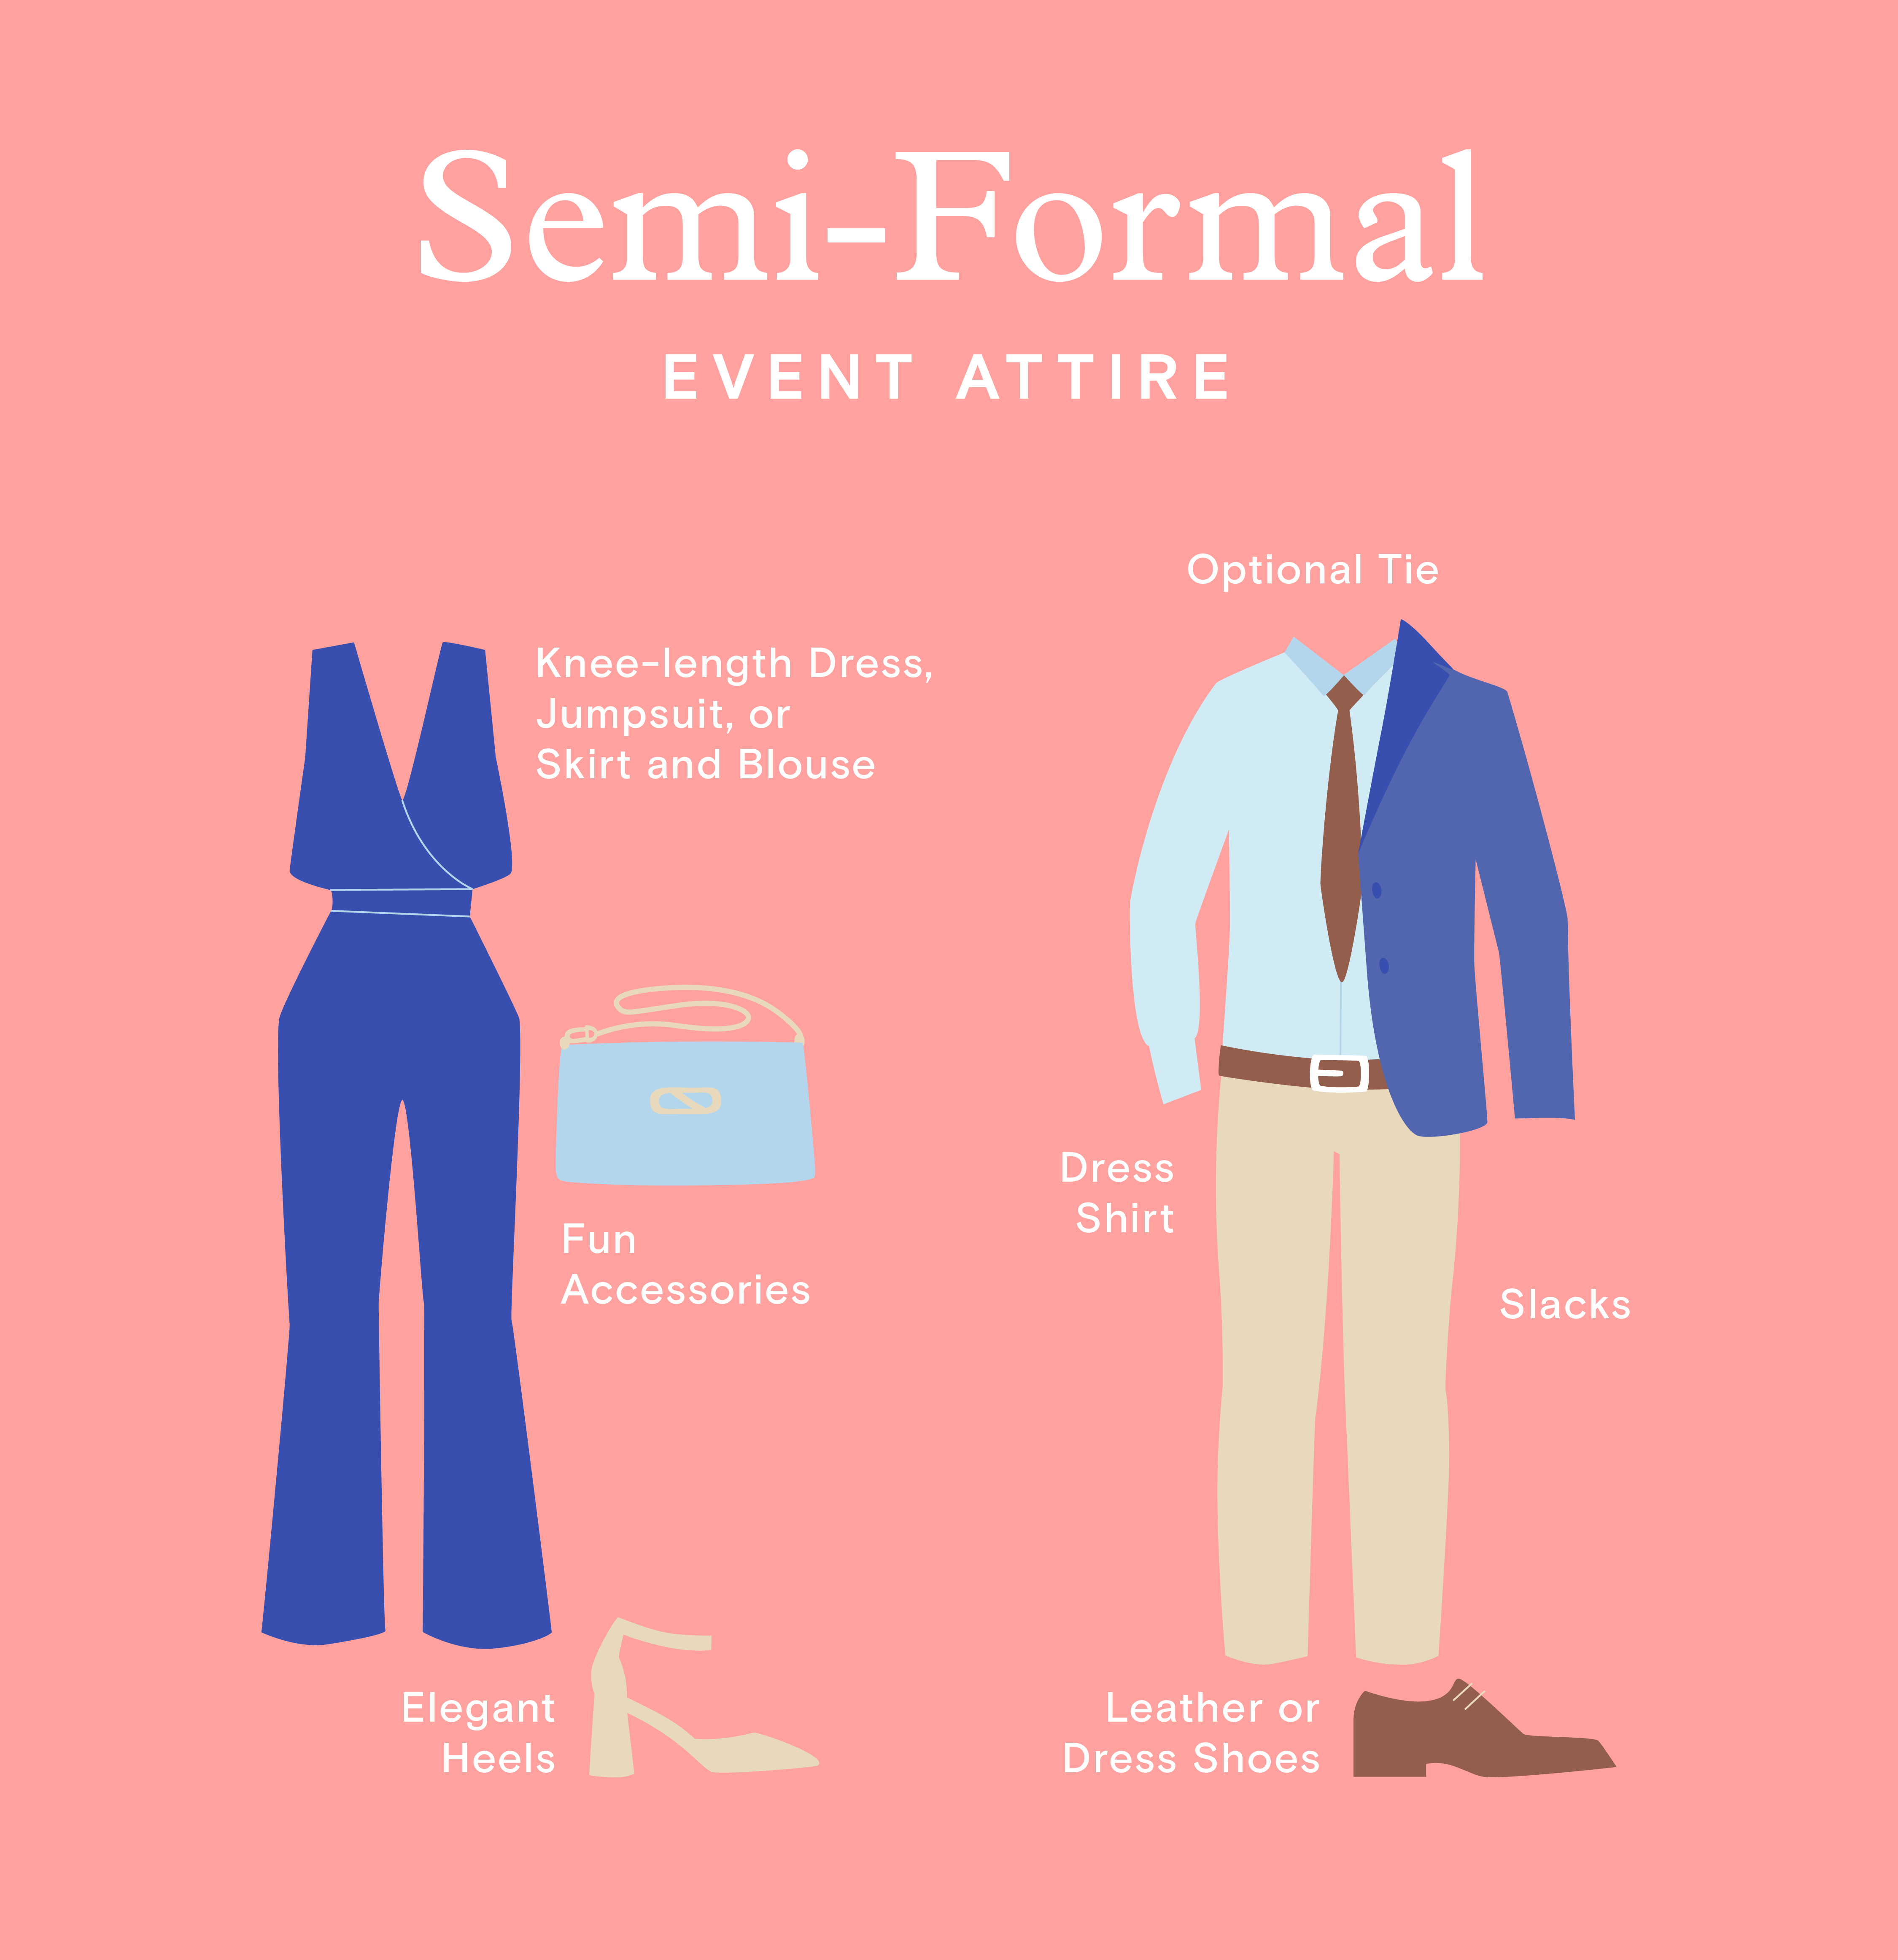 How to Dress for a Semiformal Event